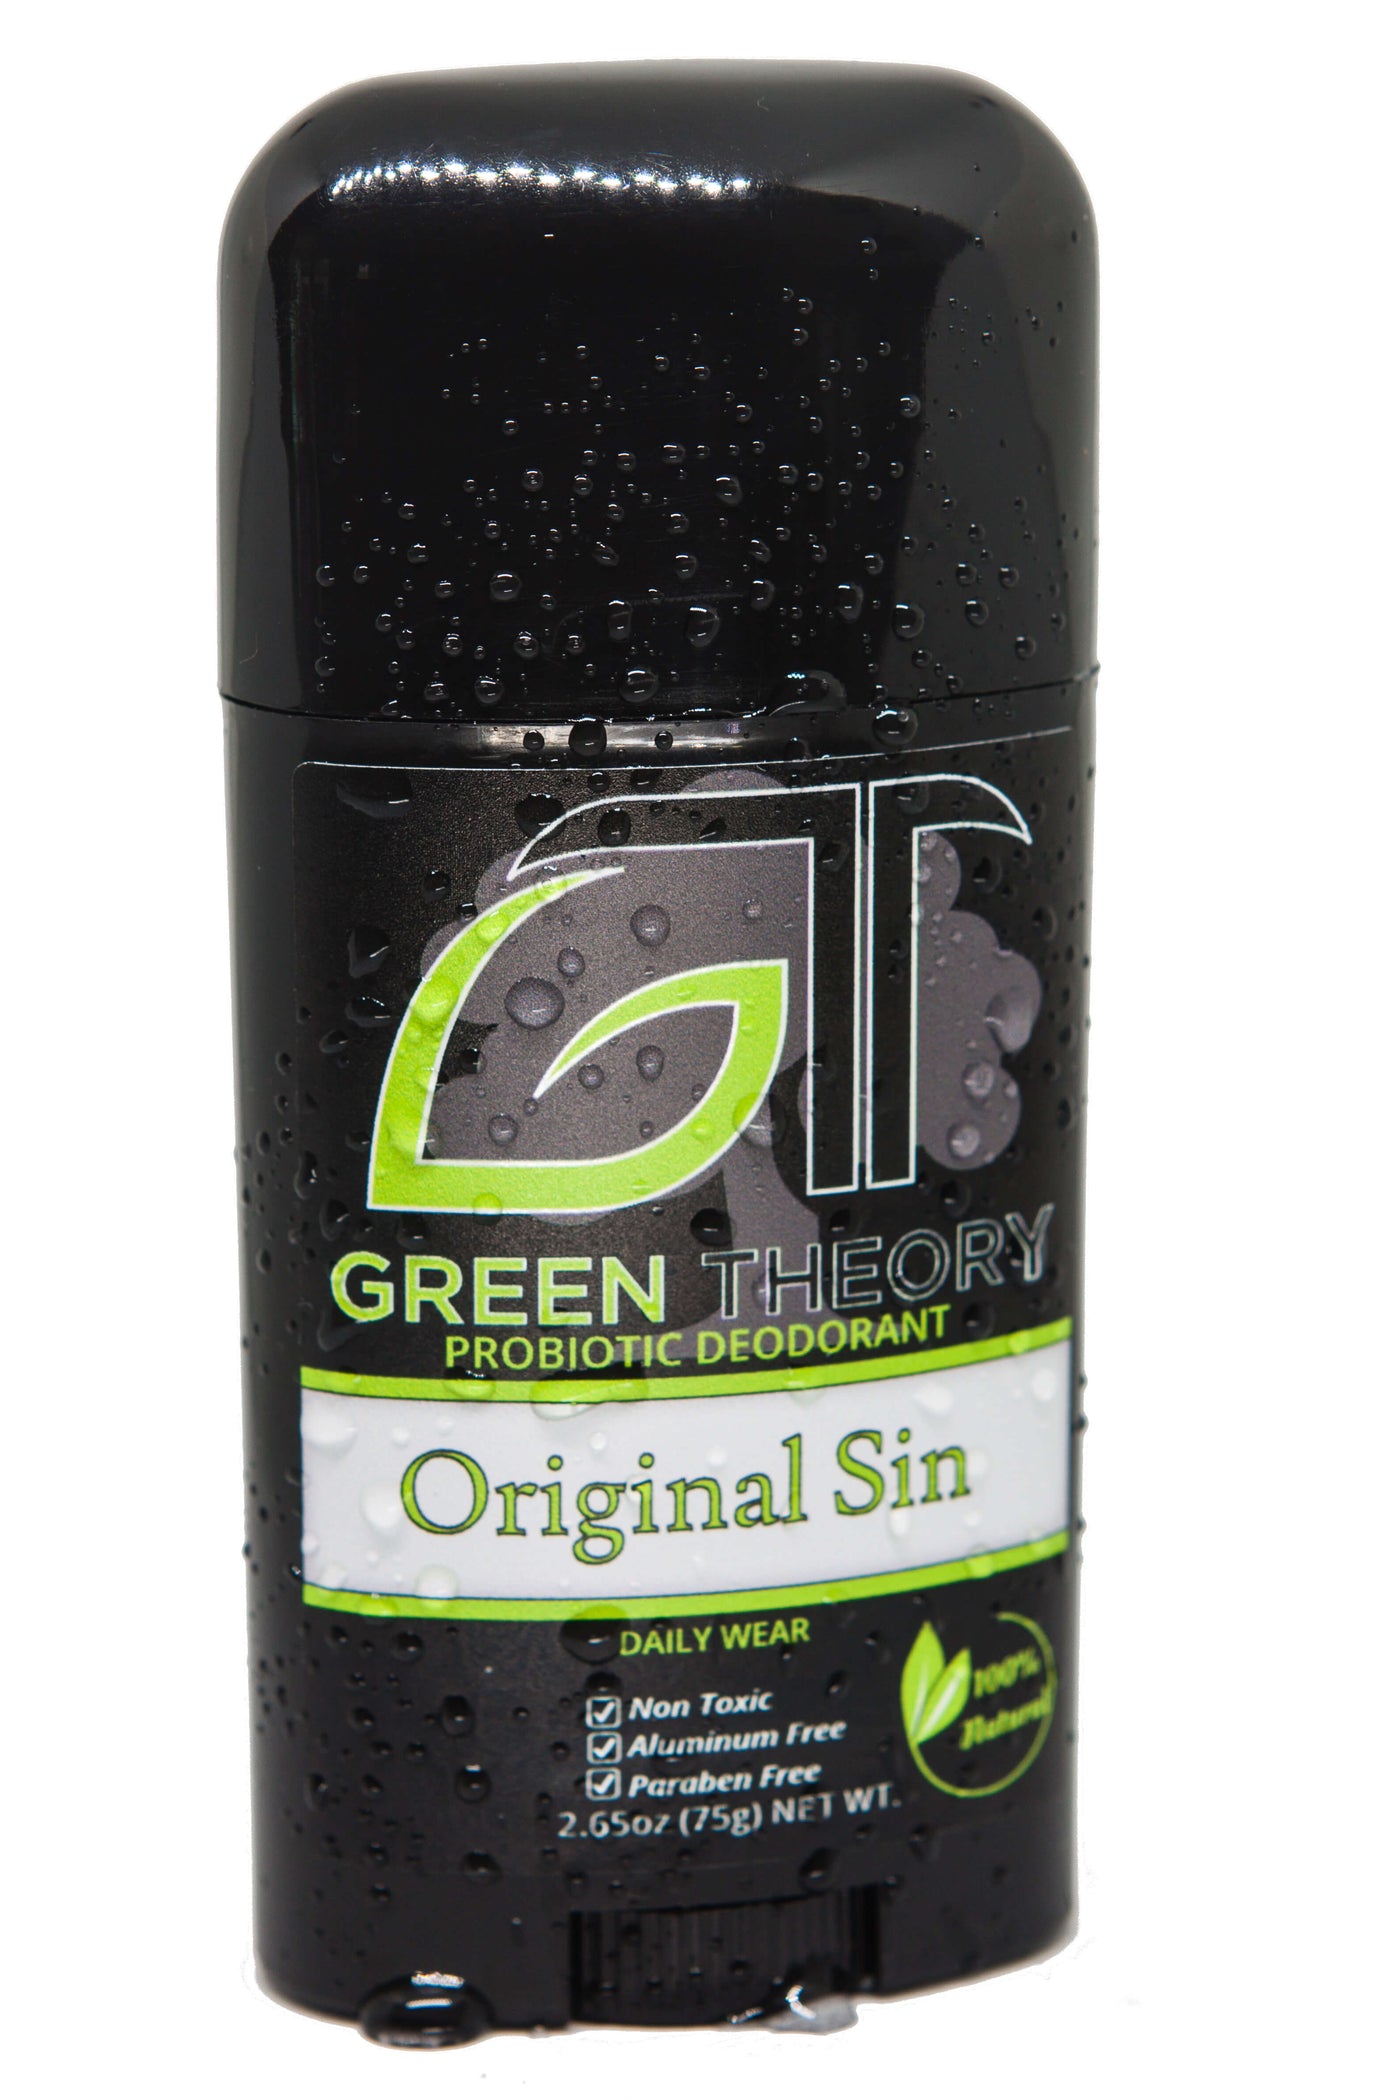 Original Sin probiotic natural deodorant mens standing upright with water beads on the container against a white background